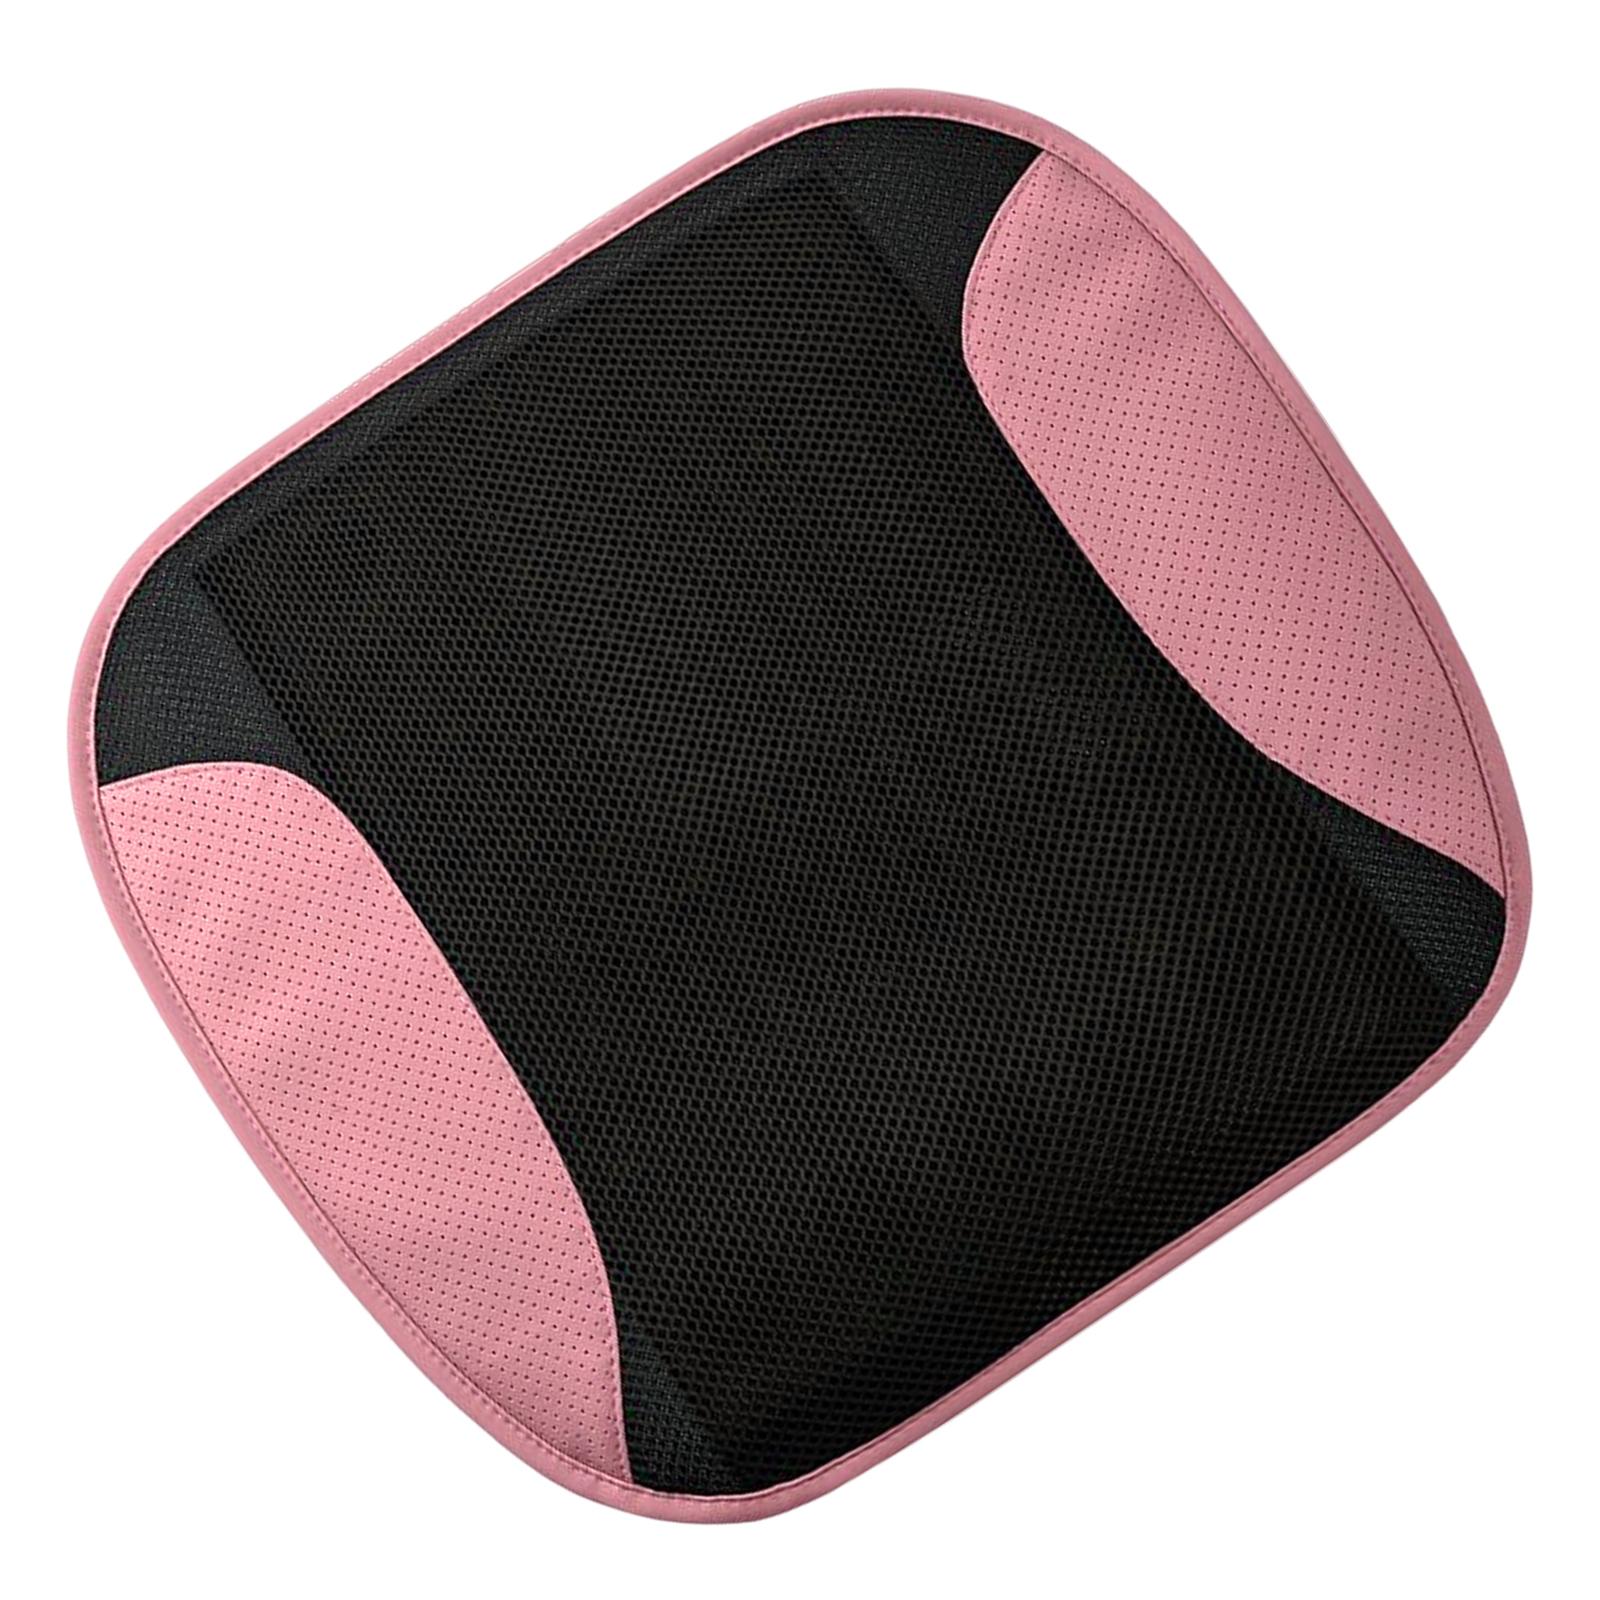 Car Seat Cover USB Port 5 Cooling Fans Inside for Office Chair Car Pink